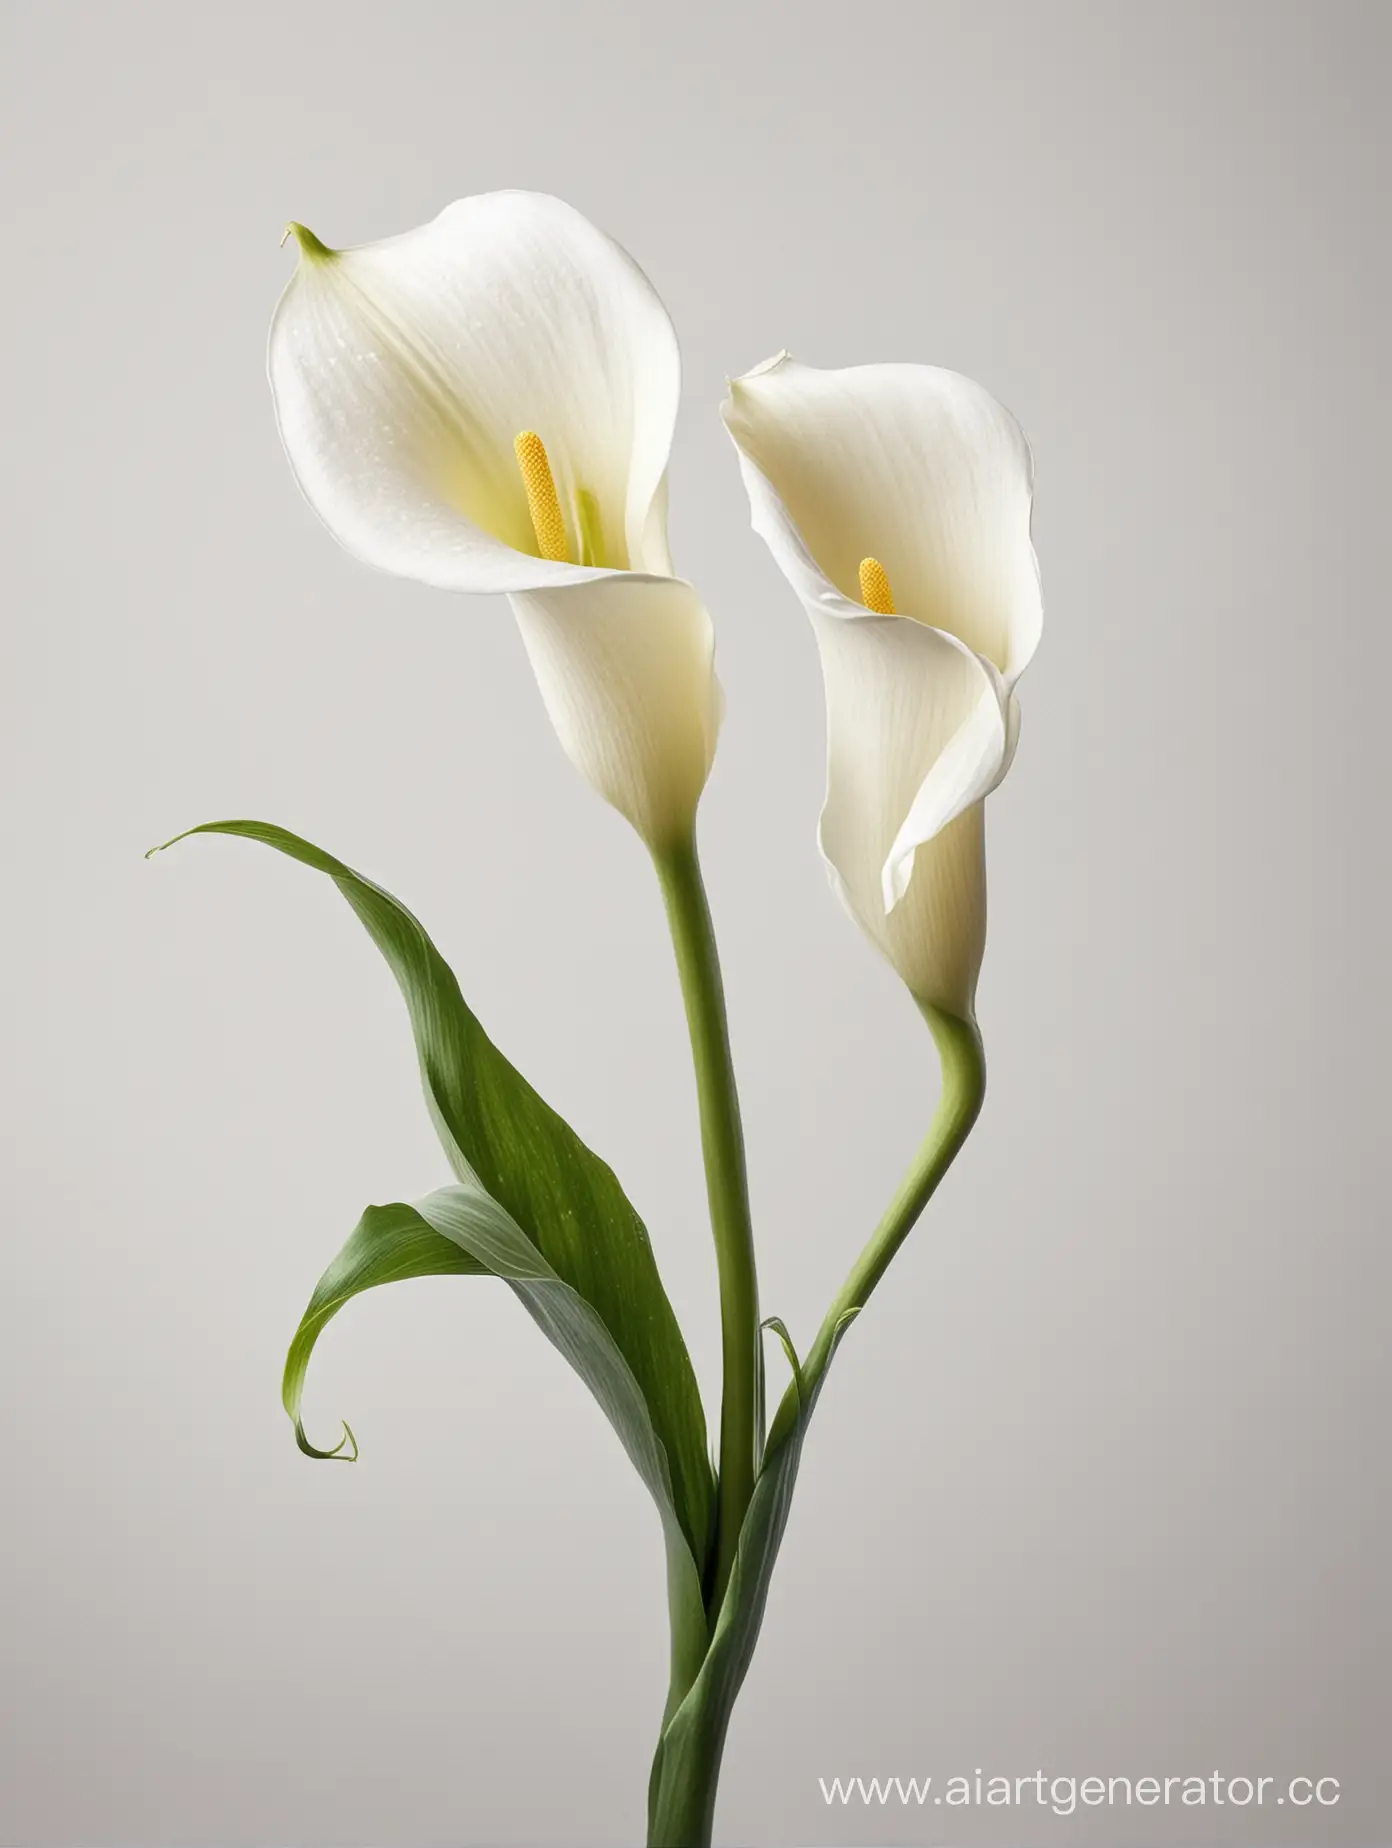 Elegant-White-Calla-Lily-Flower-on-Clean-Background